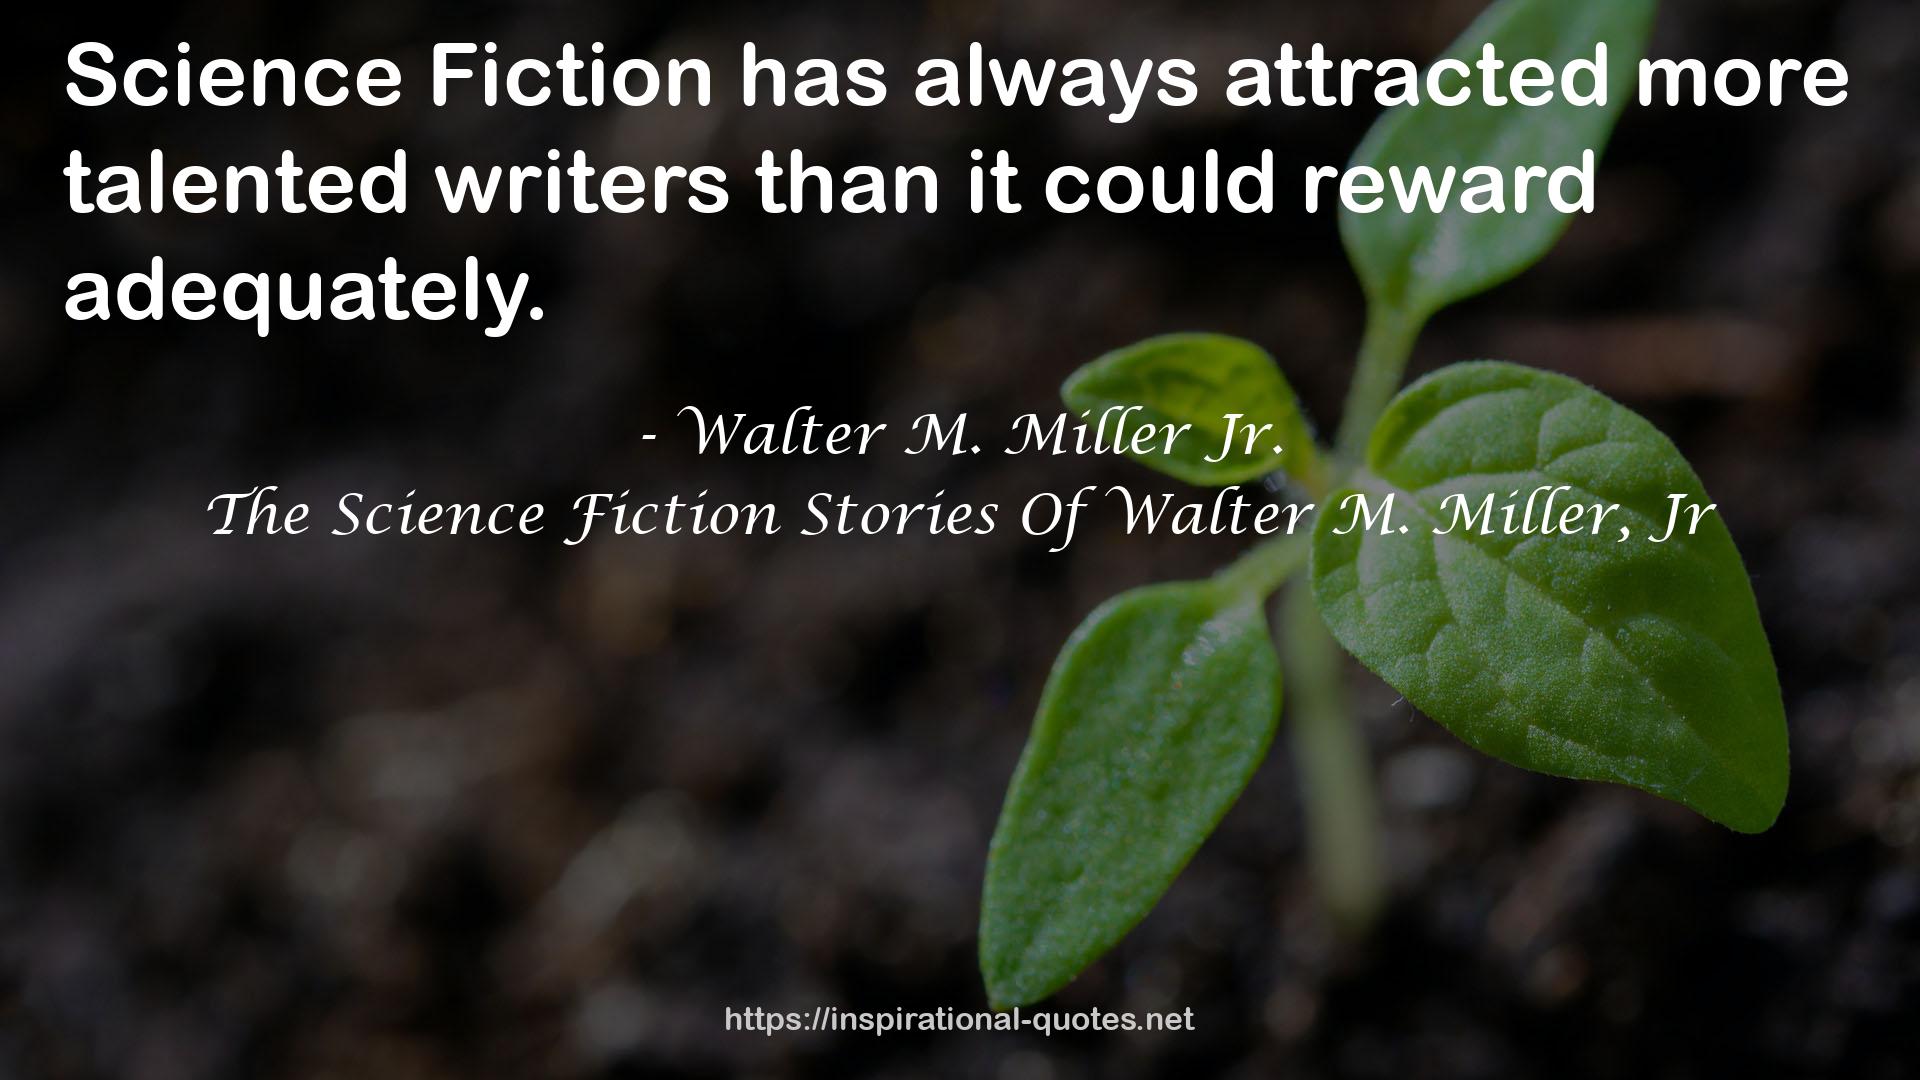 The Science Fiction Stories Of Walter M. Miller, Jr QUOTES